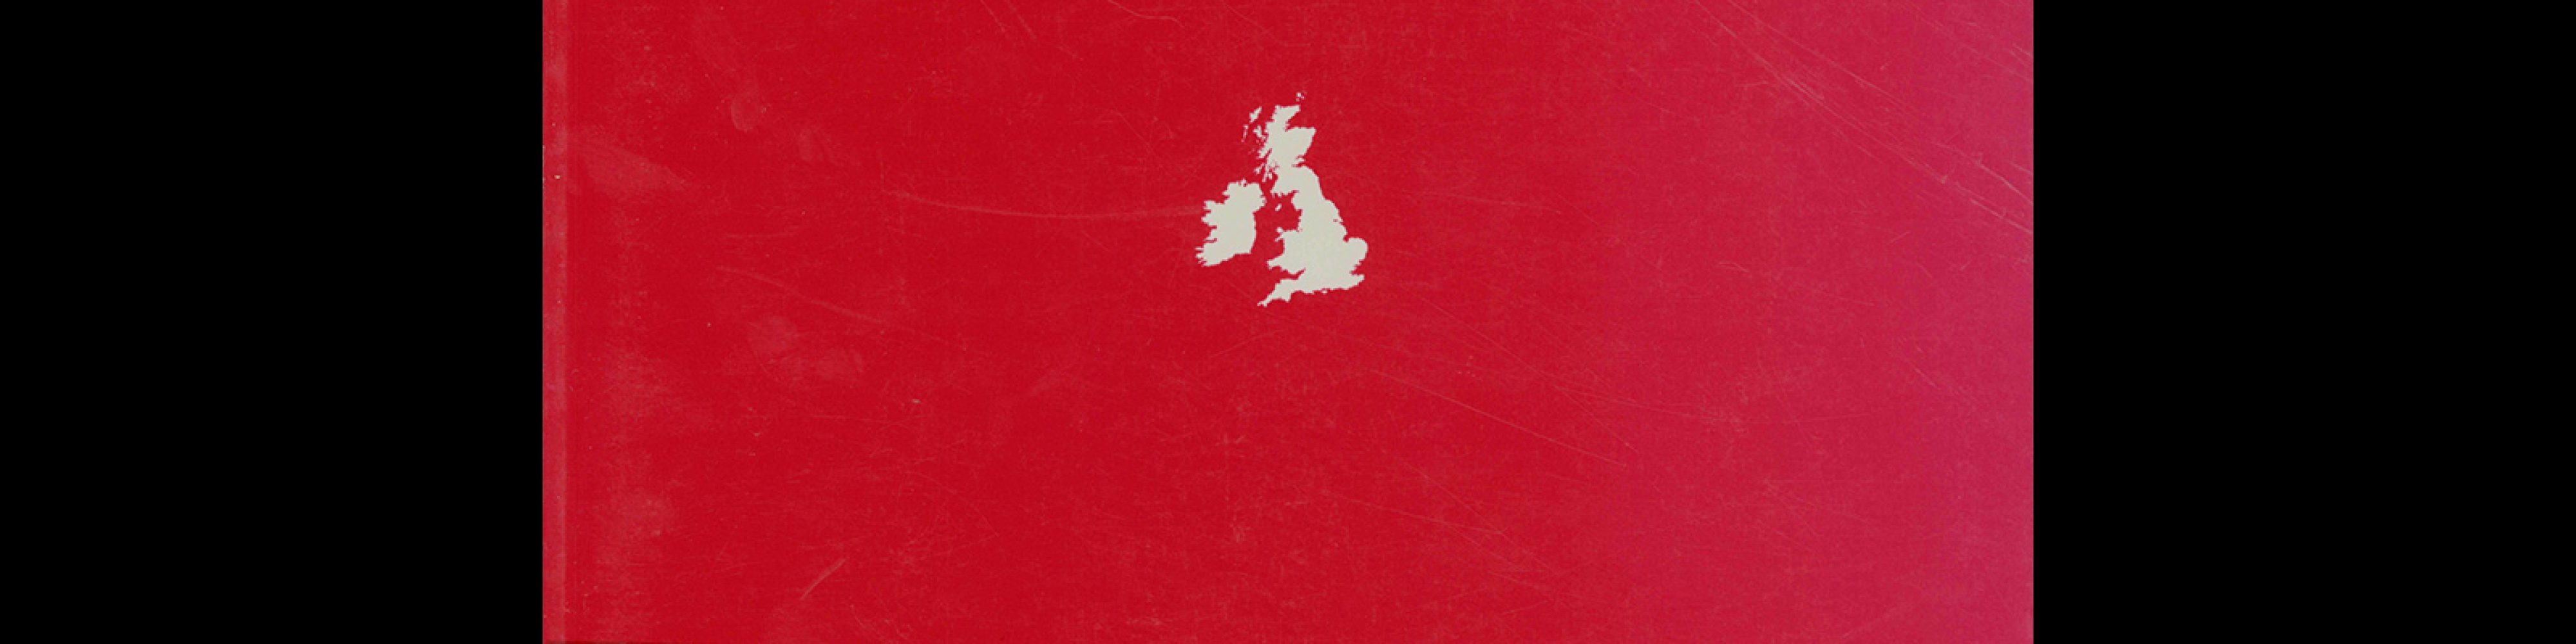 Idea 293, 2002-7. Cover design by Stanley Donwood